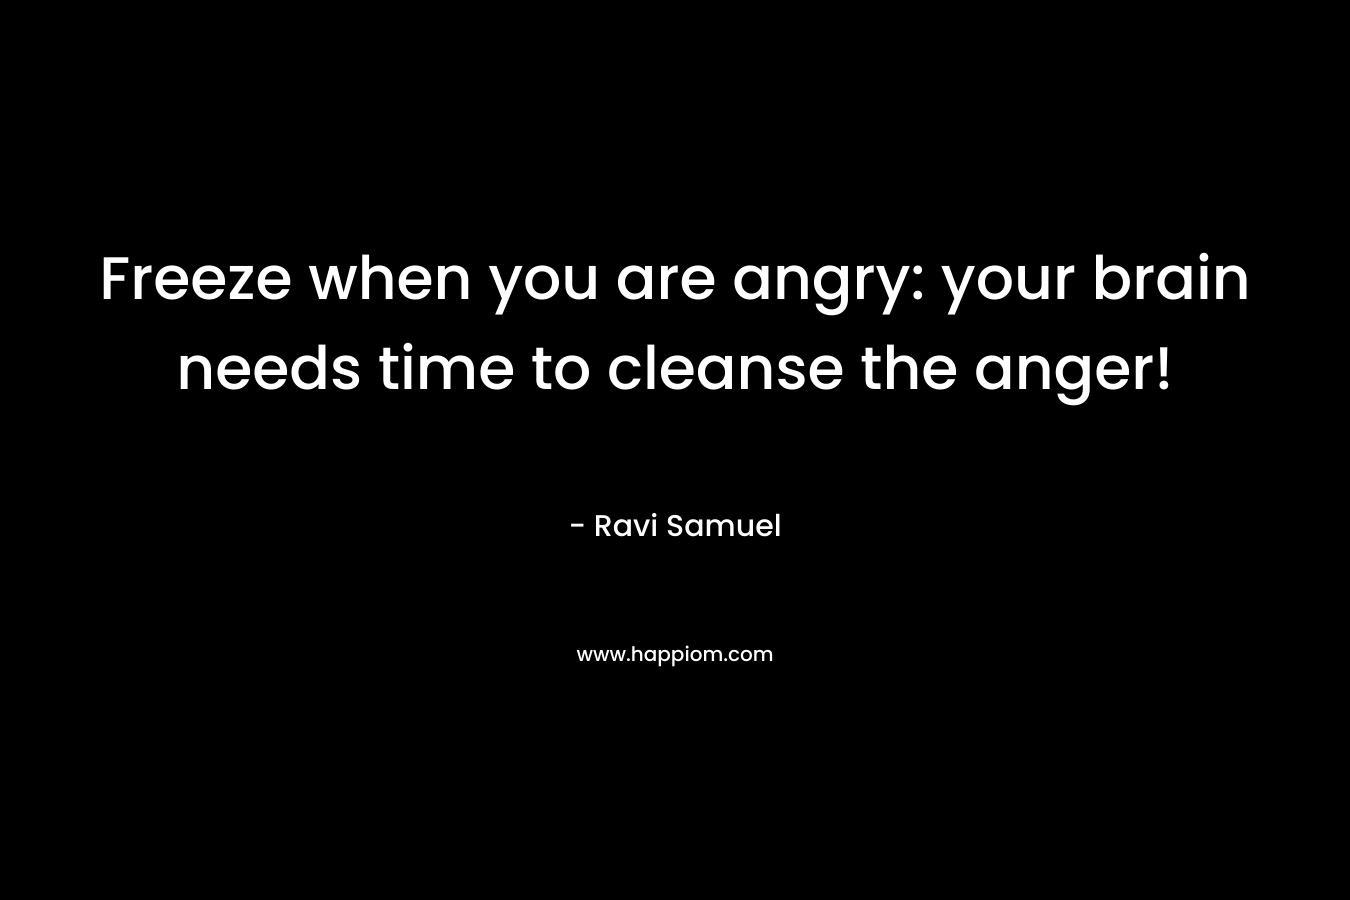 Freeze when you are angry: your brain needs time to cleanse the anger! – Ravi Samuel